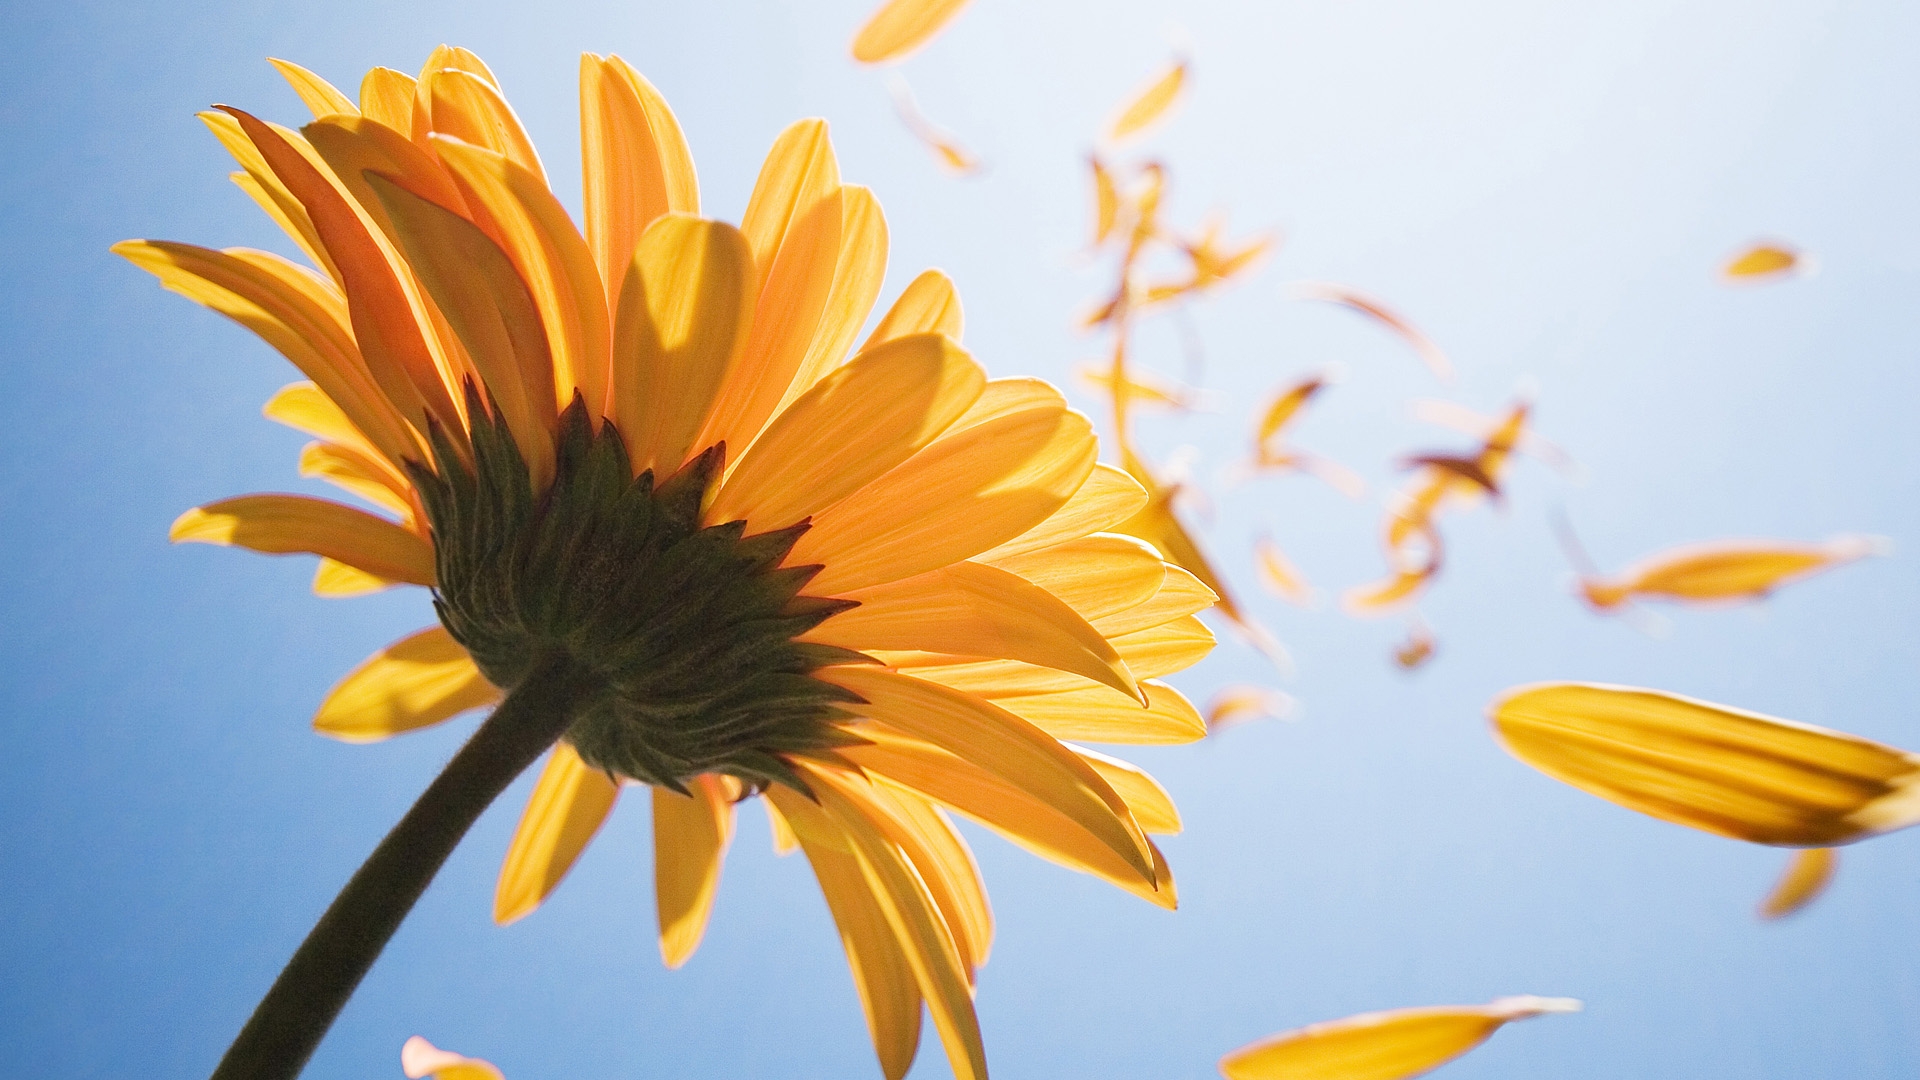 Sunflower seeds can grow fresh flowers, and novices can grow them.